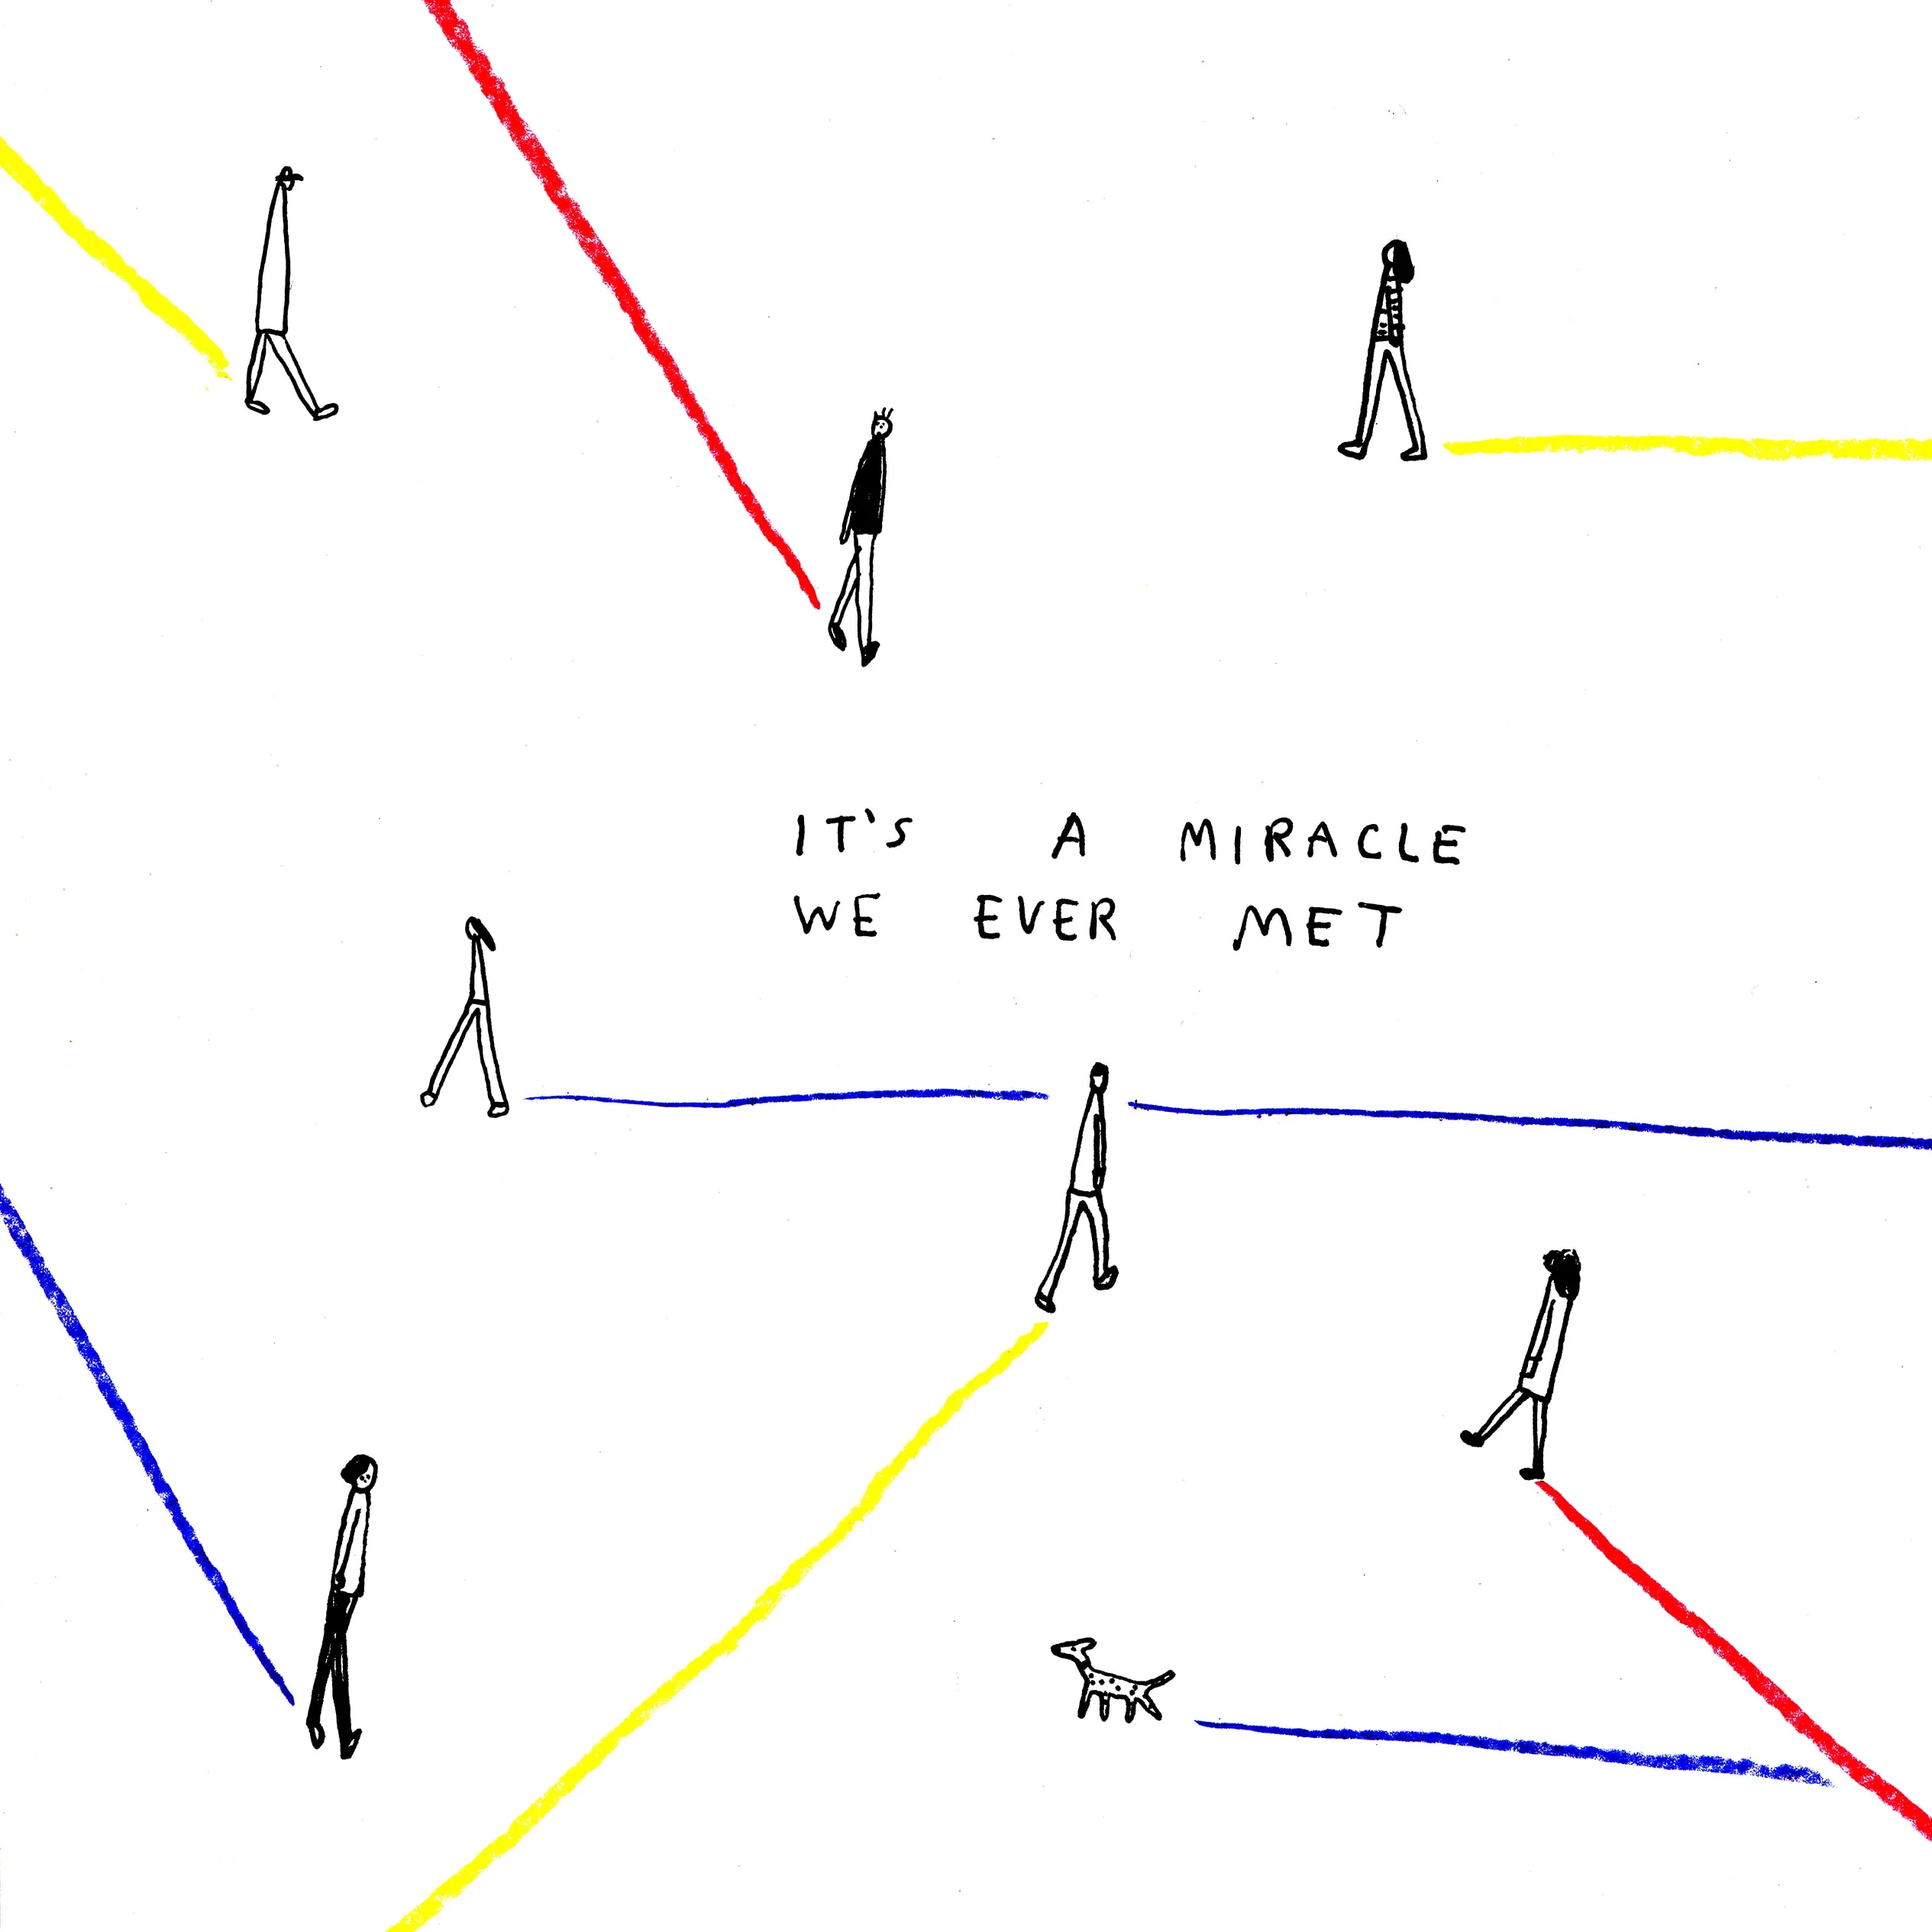 Illustration of people and a dog walking in paths across a white background. There are red, white, and blue lines trailing behind each of them. Text in the middle reads "It's a miracle we ever met."